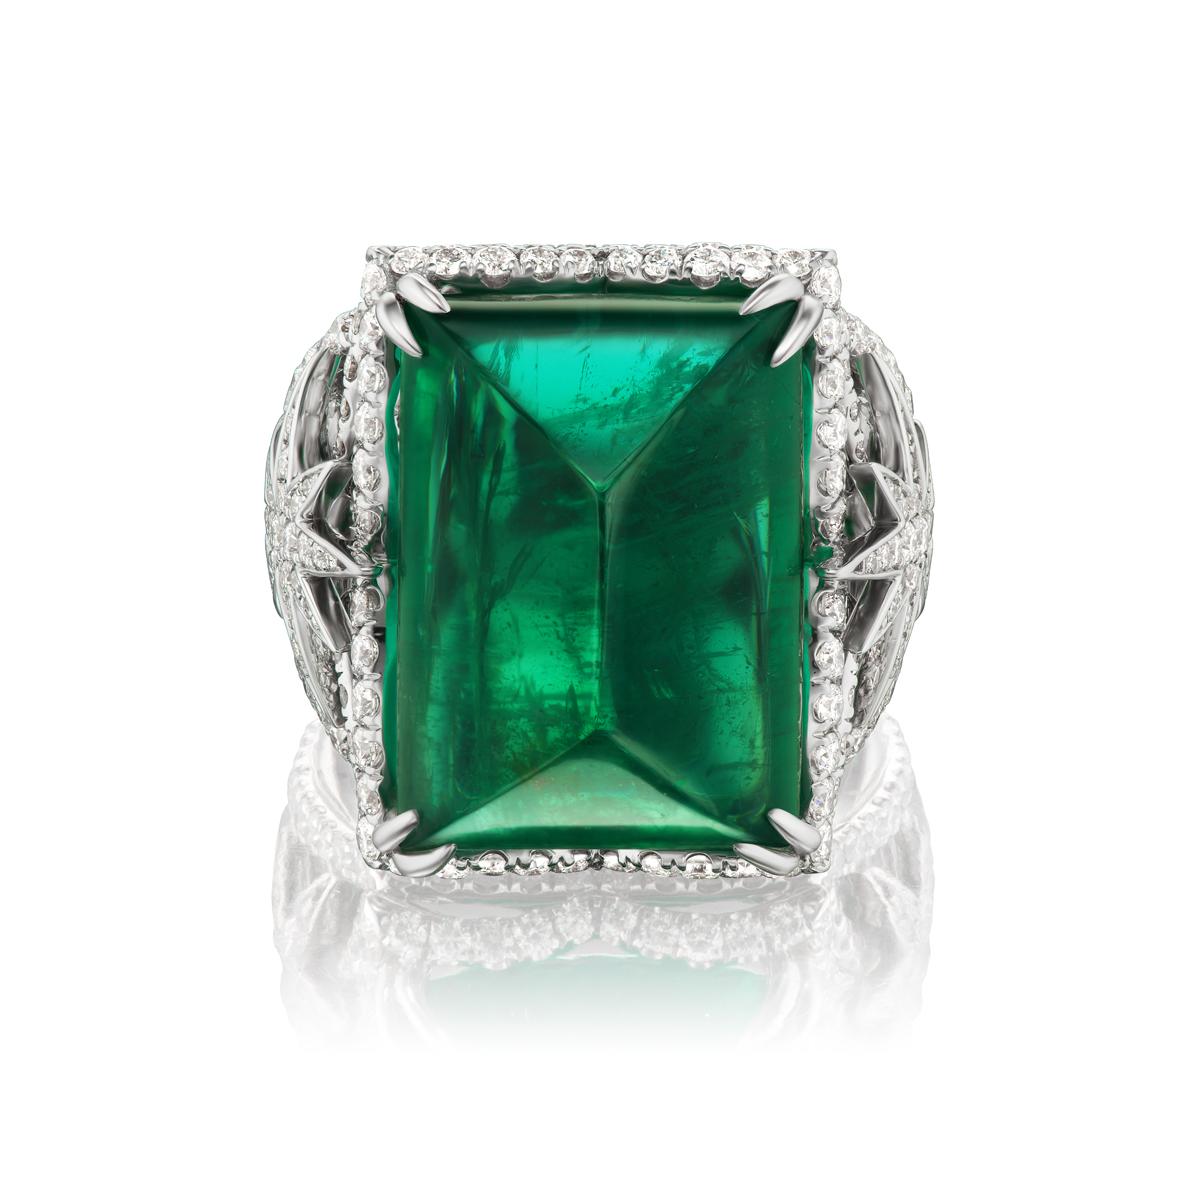 EMERALD AND DIAMOND RING
Takat's new collection displays this elegant Cabochon cut emerald with a classy star design for only the finest diamonds

Item:	# 04093
Metal:	18k White Gold
Color Weight:	23.36 ct.
Diamond Weight:	1.82 ct.